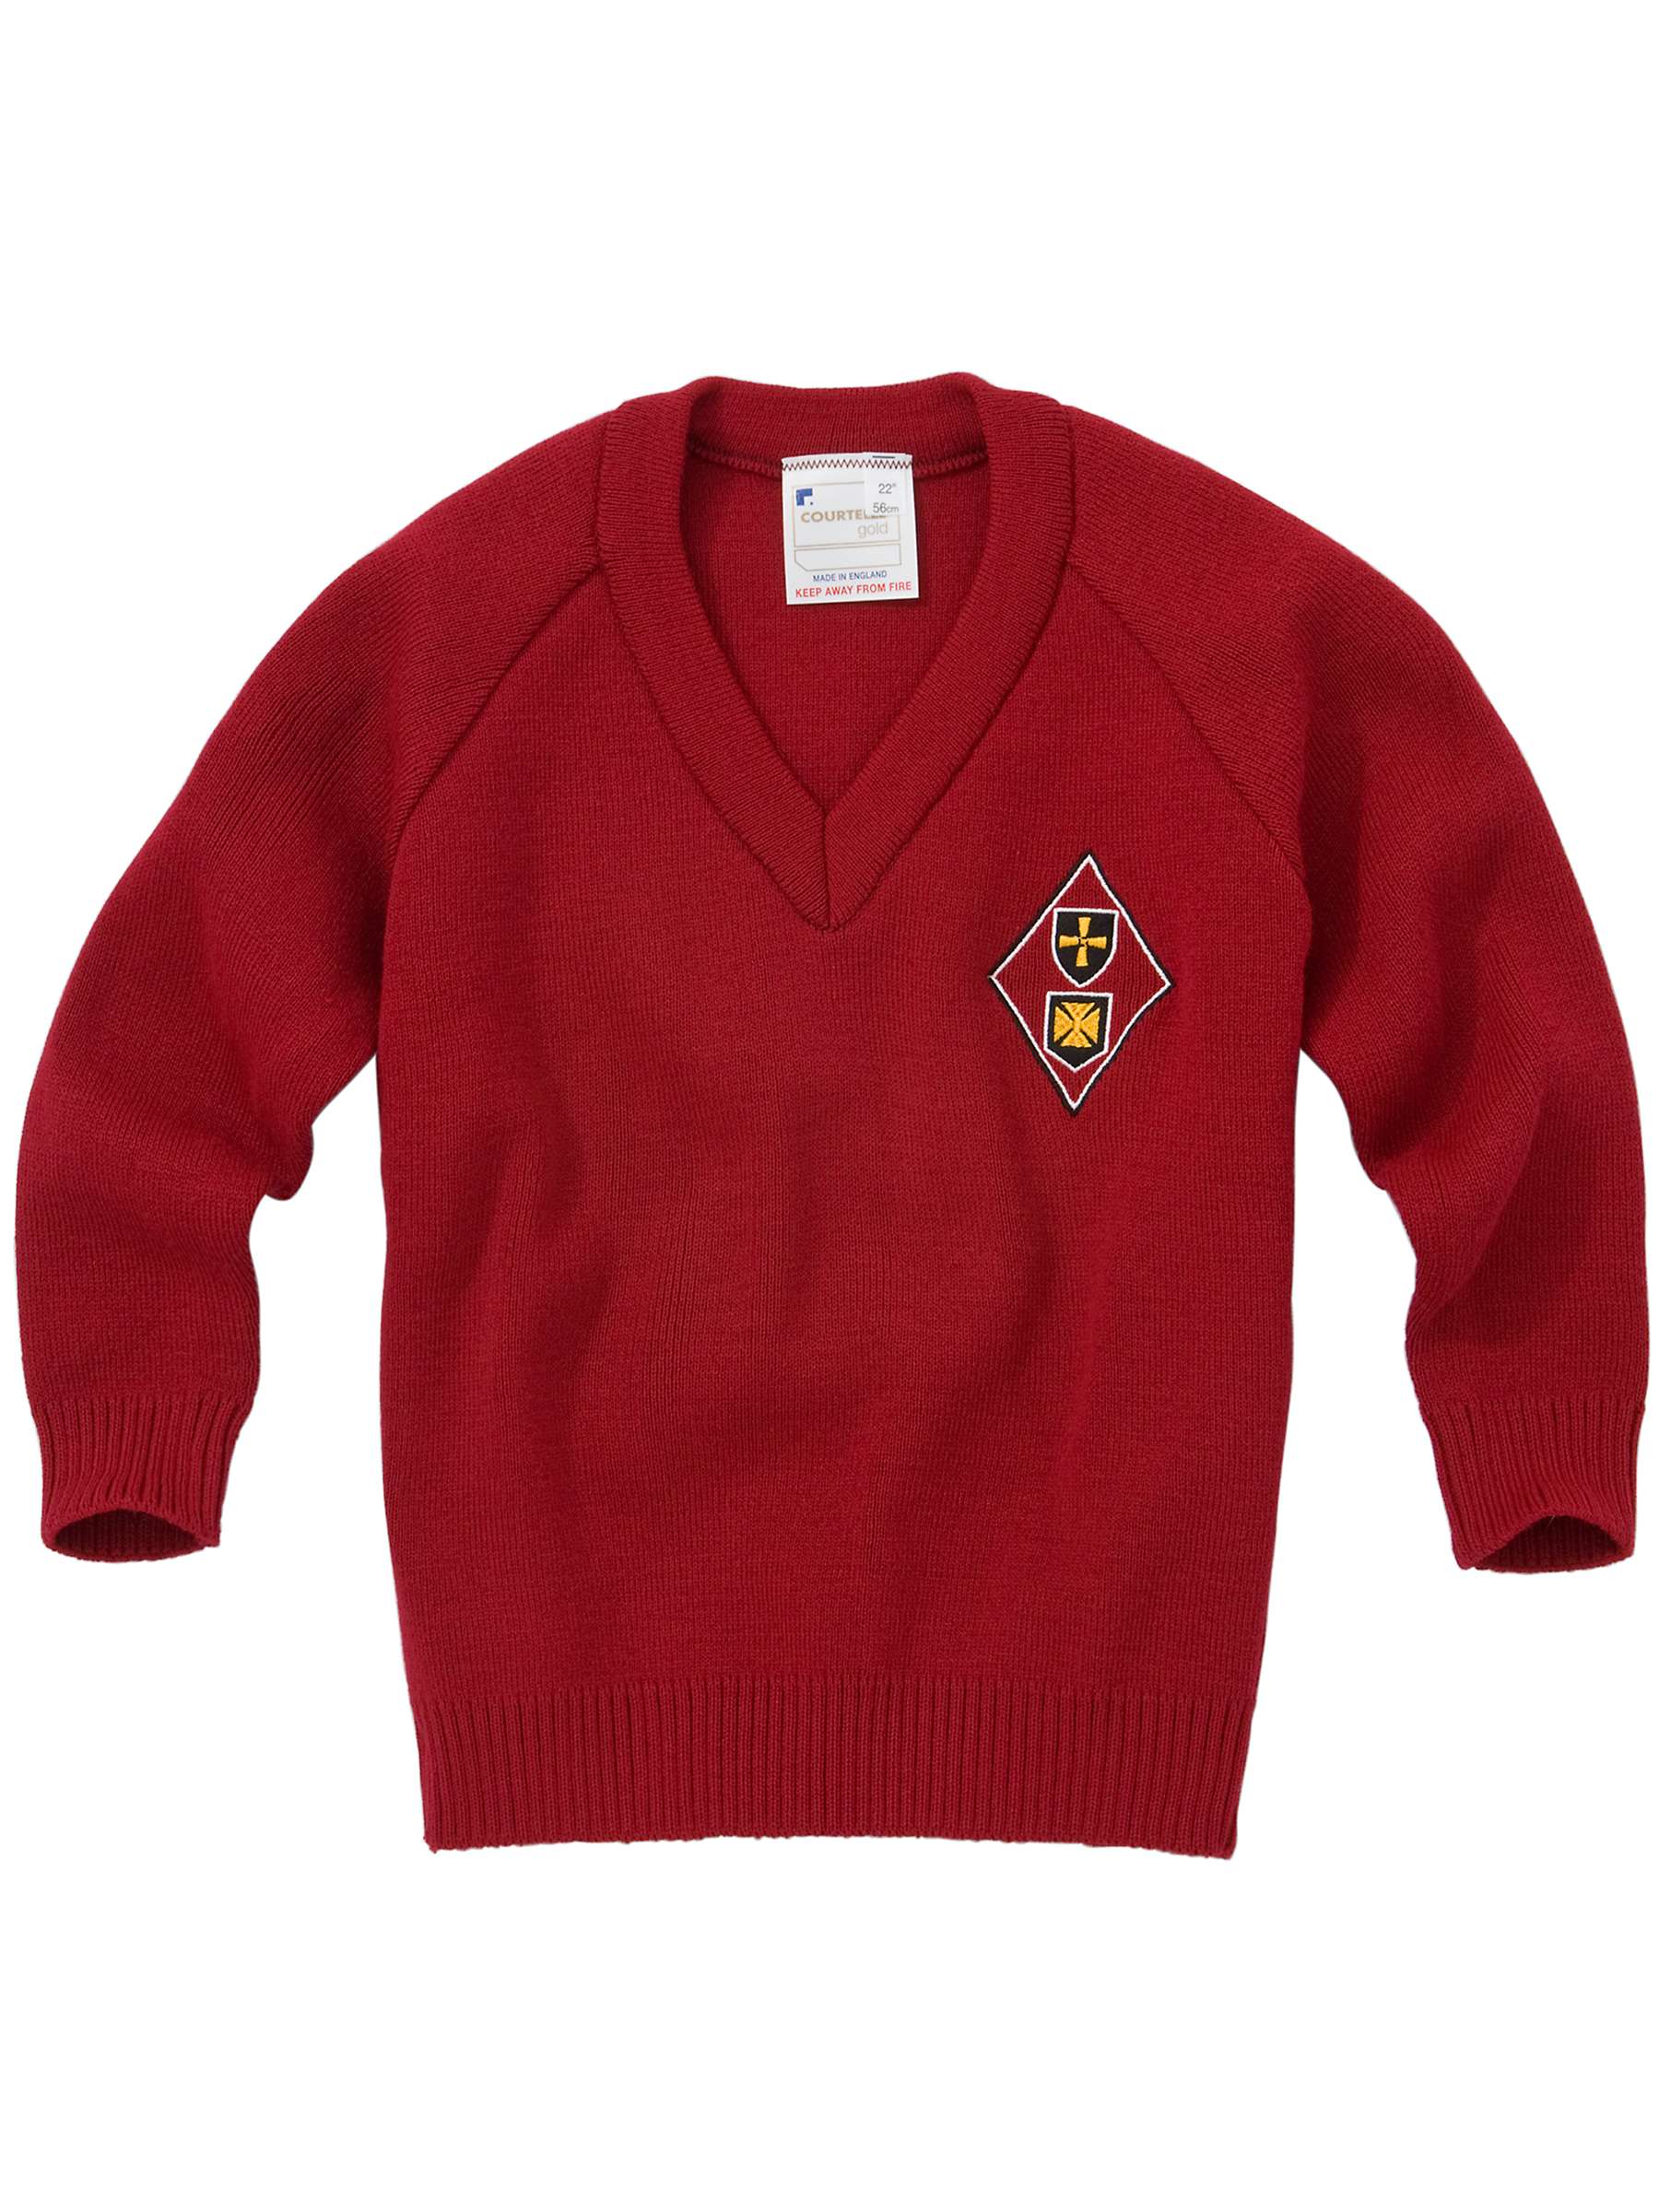 Buy Dame Allan's School Nursery and Reception and Years 1-6 Unisex Pullover, Red Online at johnlewis.com